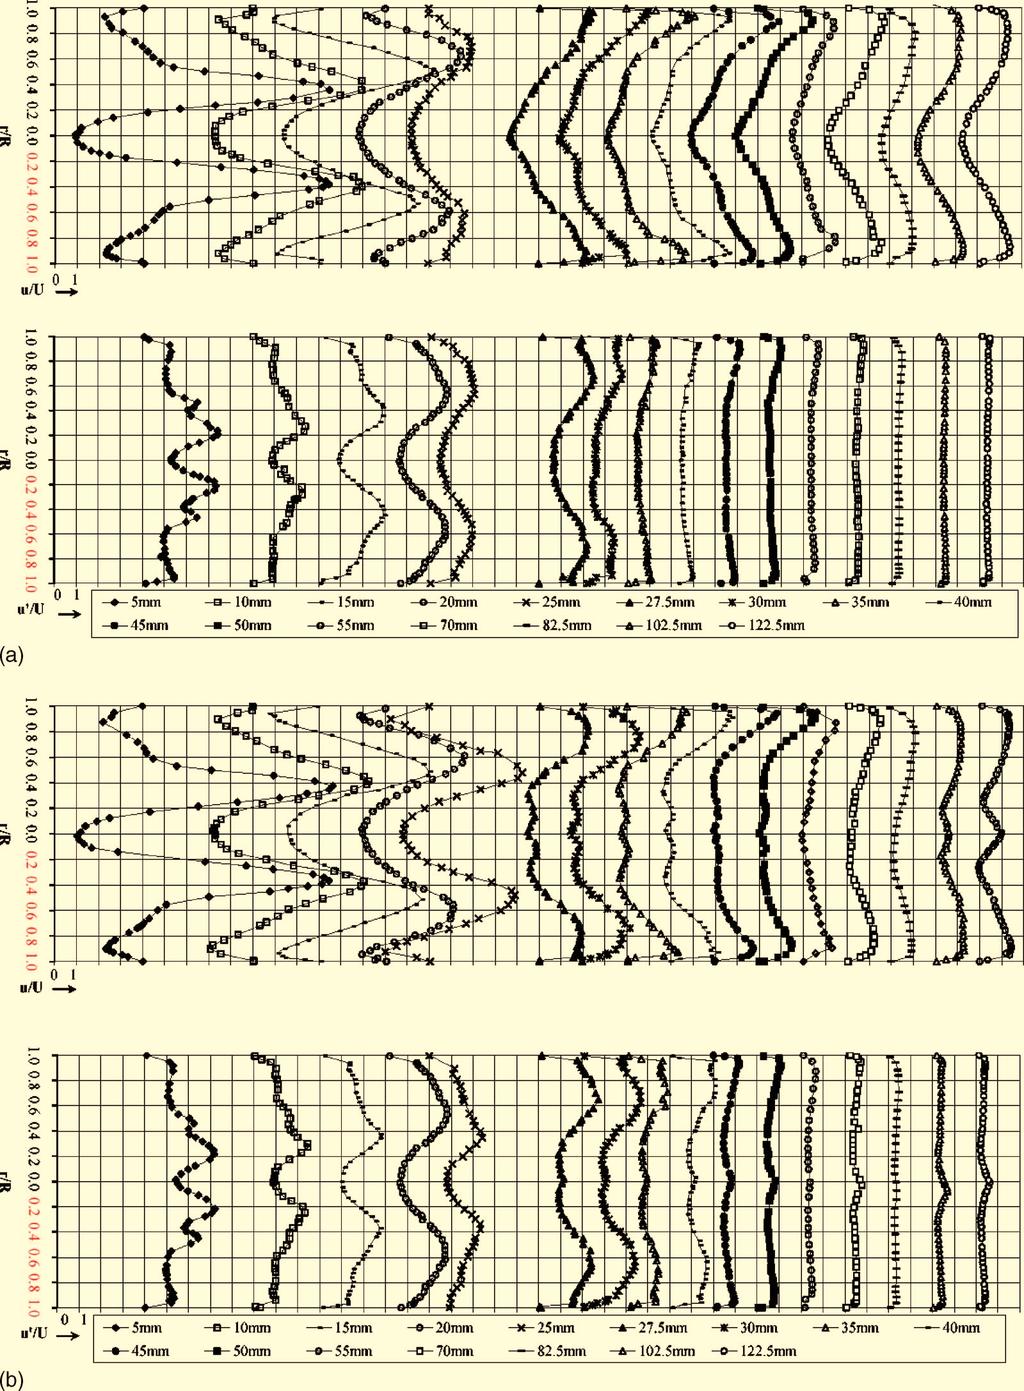 125103-12 Escudier, Nickson, and Poole Phys. Fluids 18, 125103 2006 FIG. 9. a Radial distributions of mean axial velocity and axial-velocity fluctuations for high swirl S E =0.6, fully open outlet.